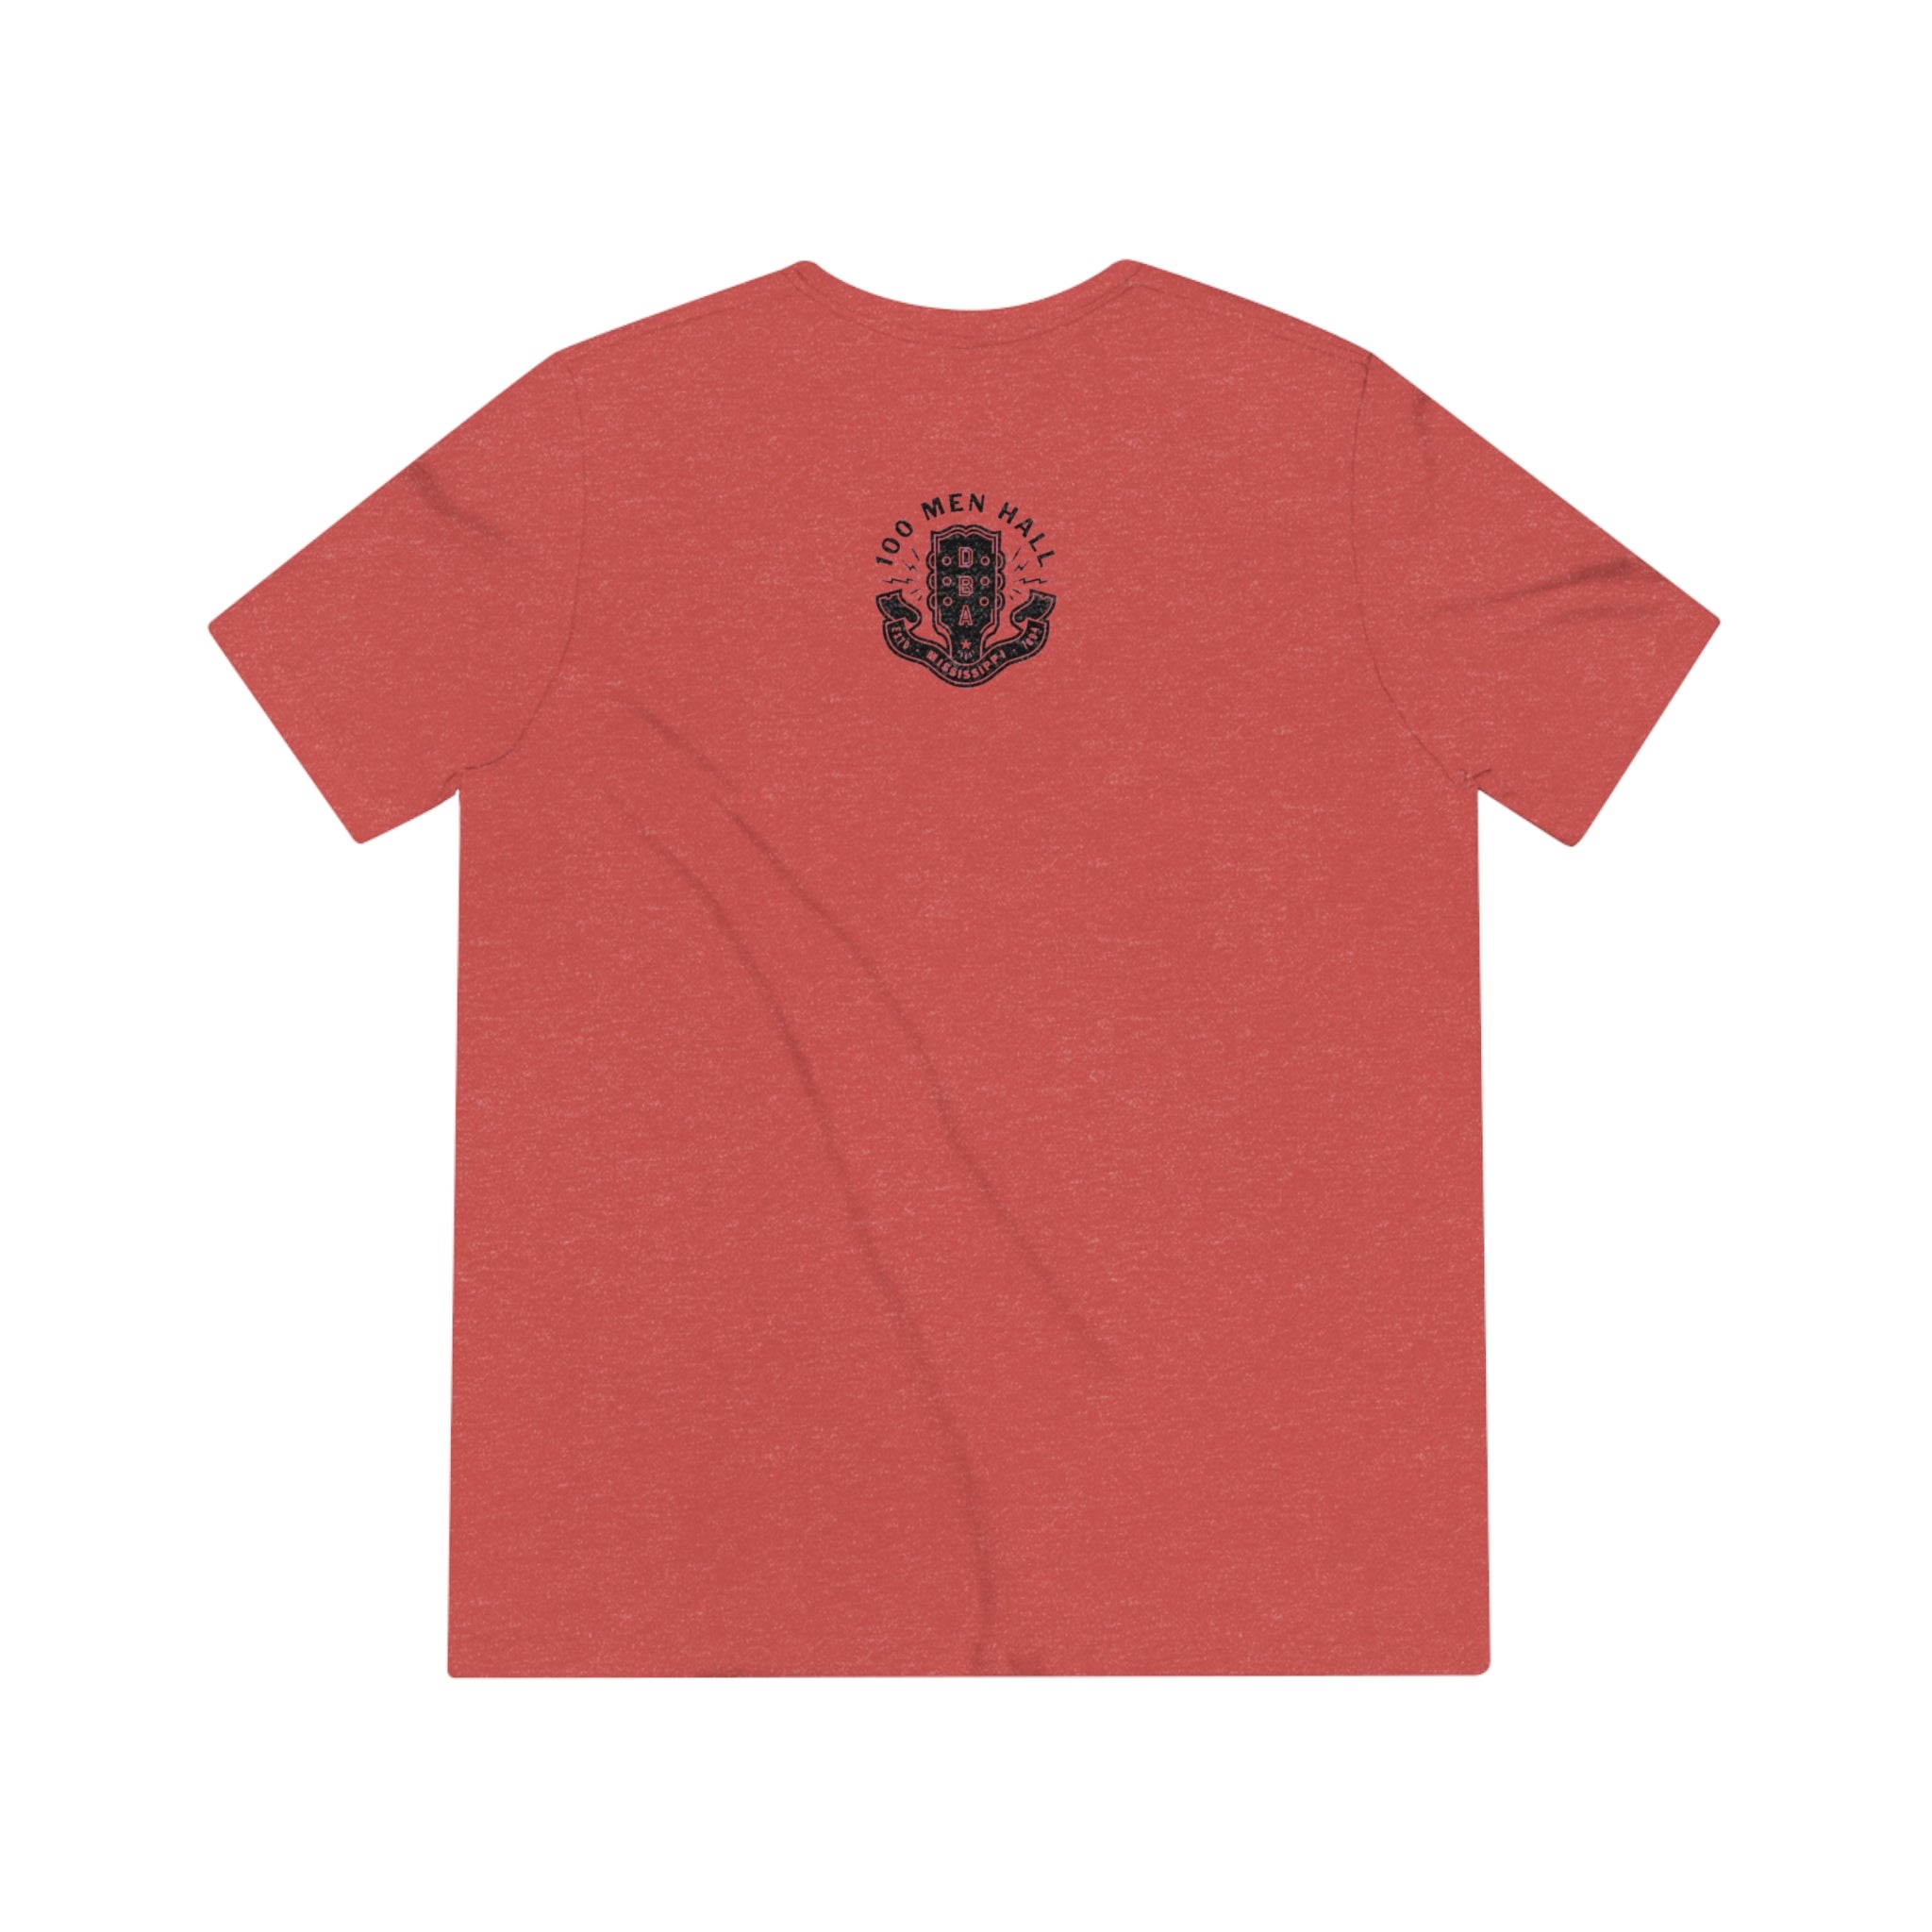 100 Years of Culture T-Shirt - Red